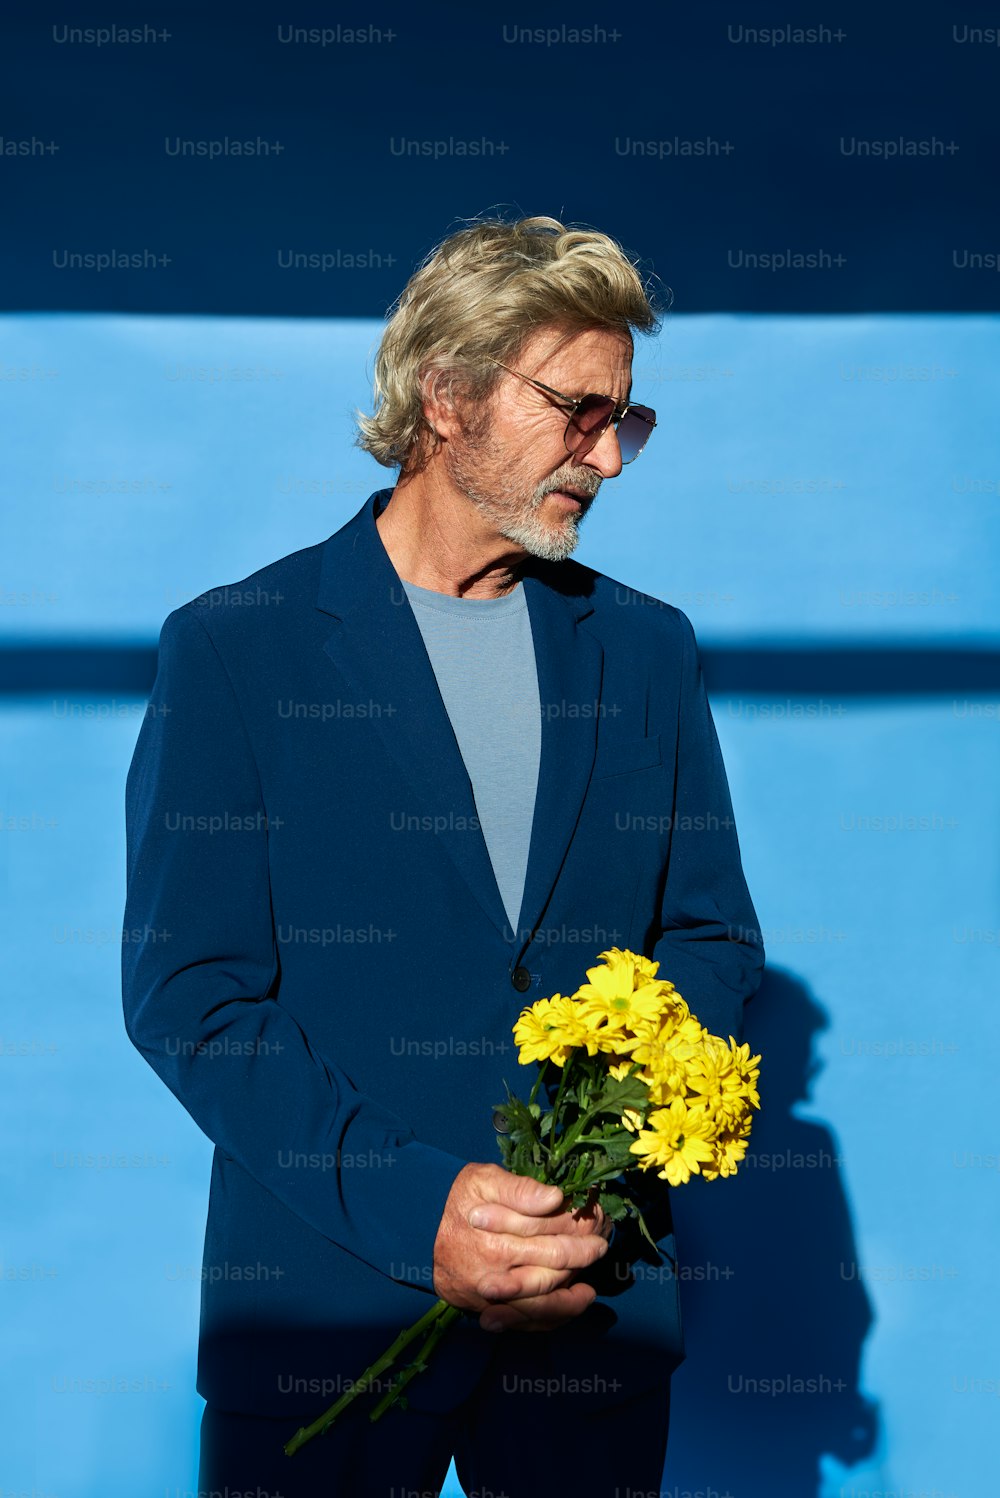 a man in a suit holding a bouquet of flowers